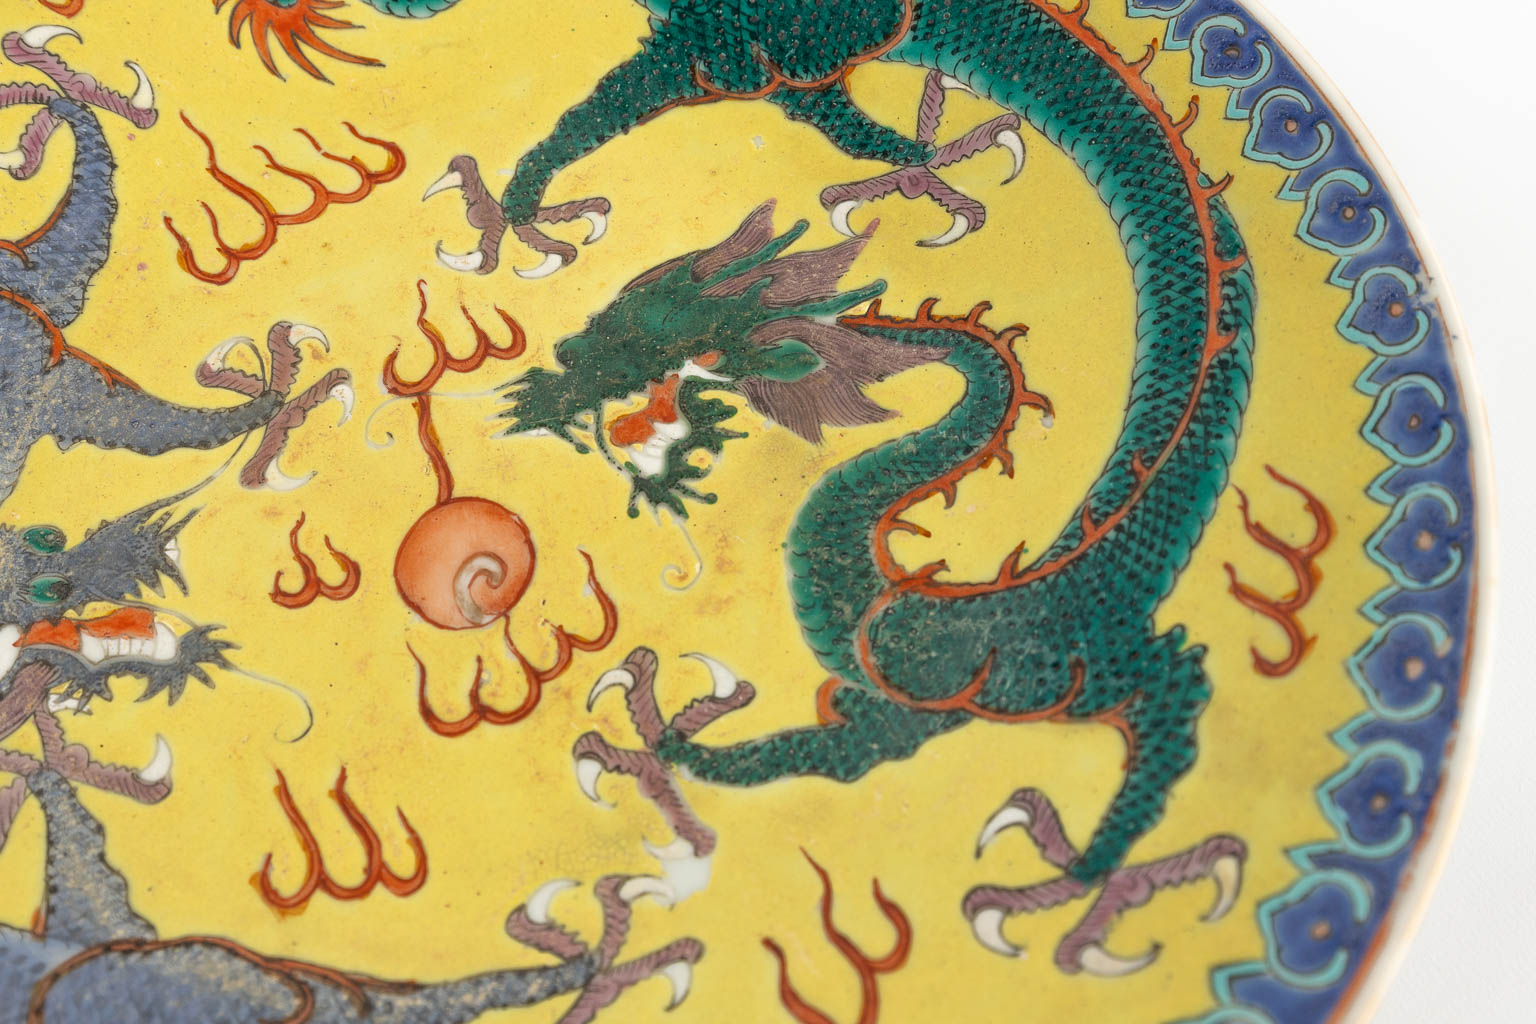 A Chinese plate with dragon decor. 19th/20th C. (D:29 cm)